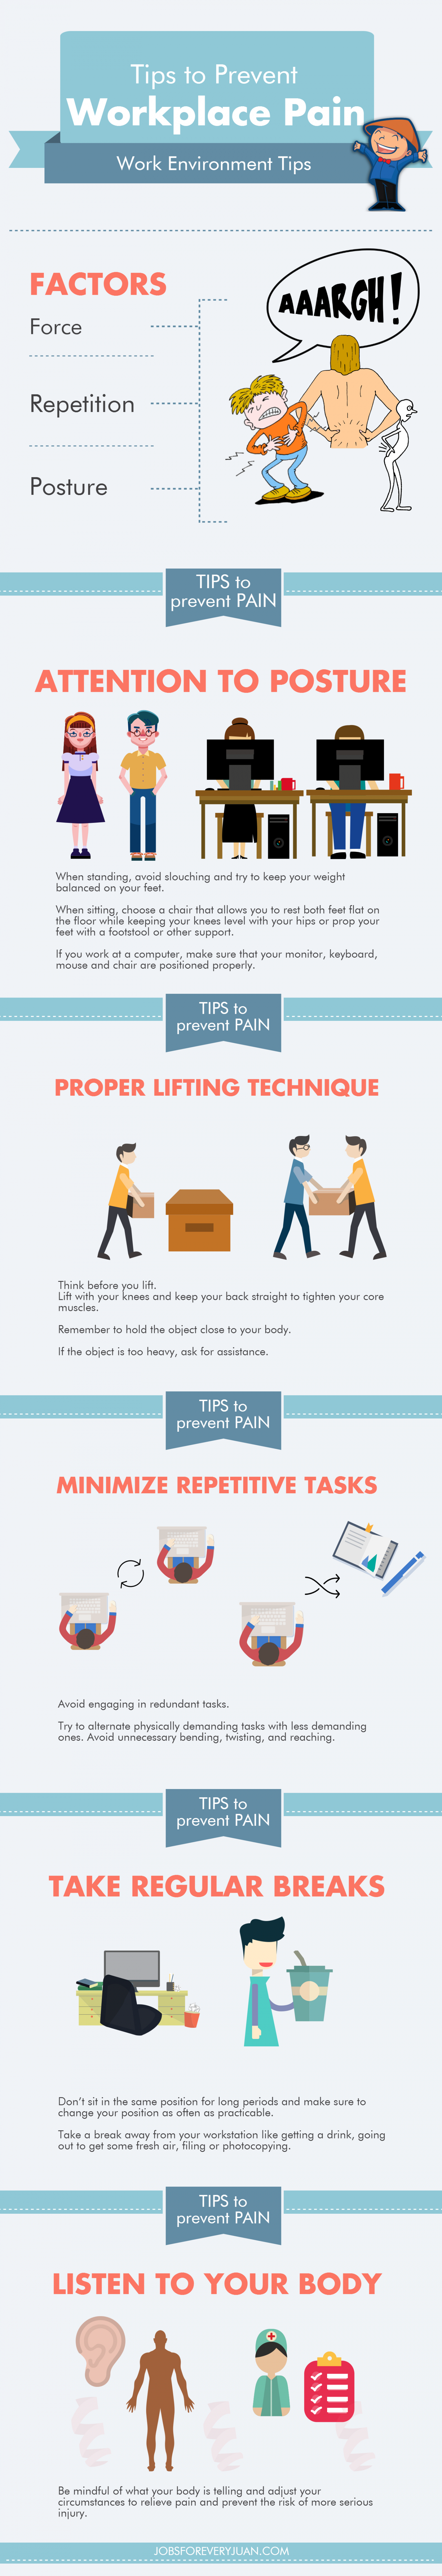 Tips to Prevent Workplace Pain Infographic